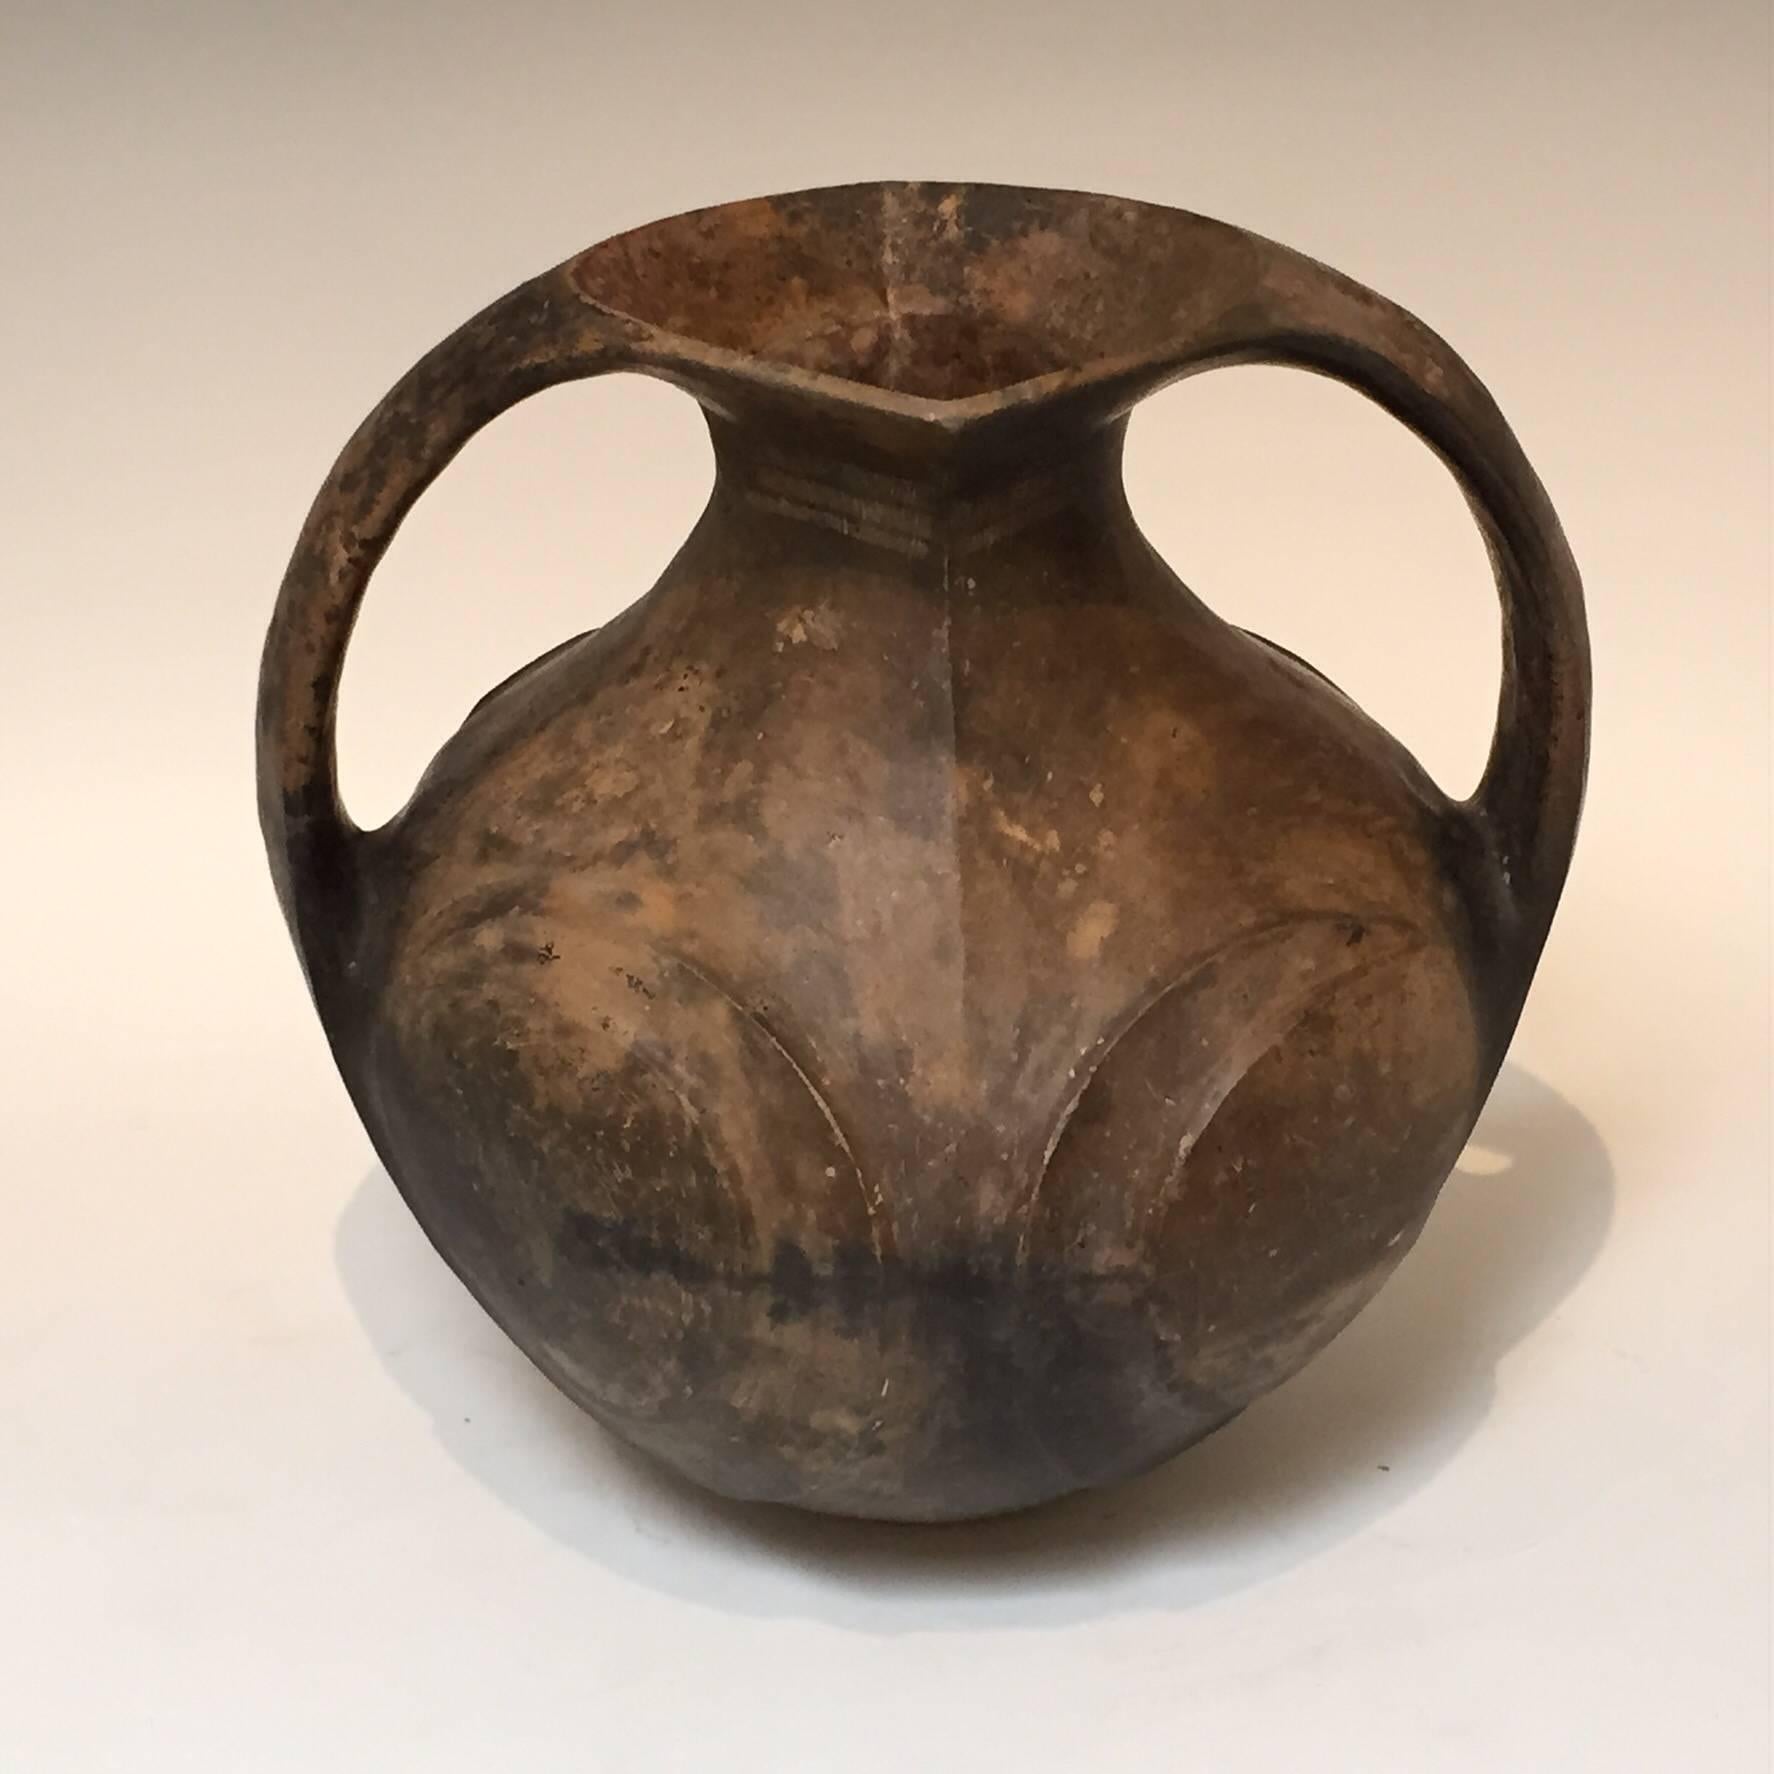 This elegant Han Dynasty amphora with two handles standing 13